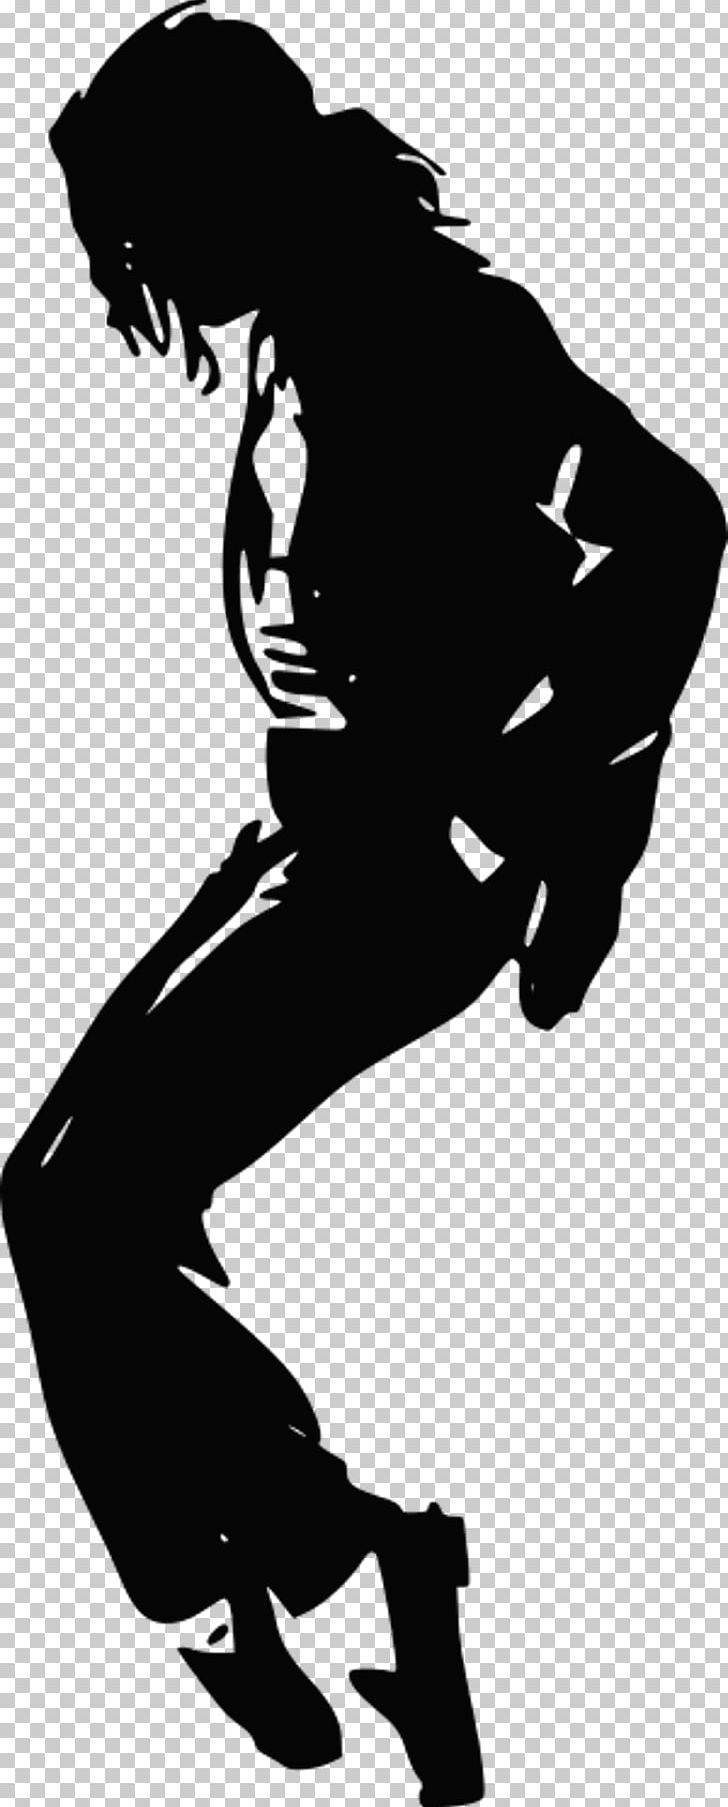 Moonwalk Silhouette King Of Pop PNG, Clipart, Art, Black, Black And White, Celebrities, Clip Art Free PNG Download